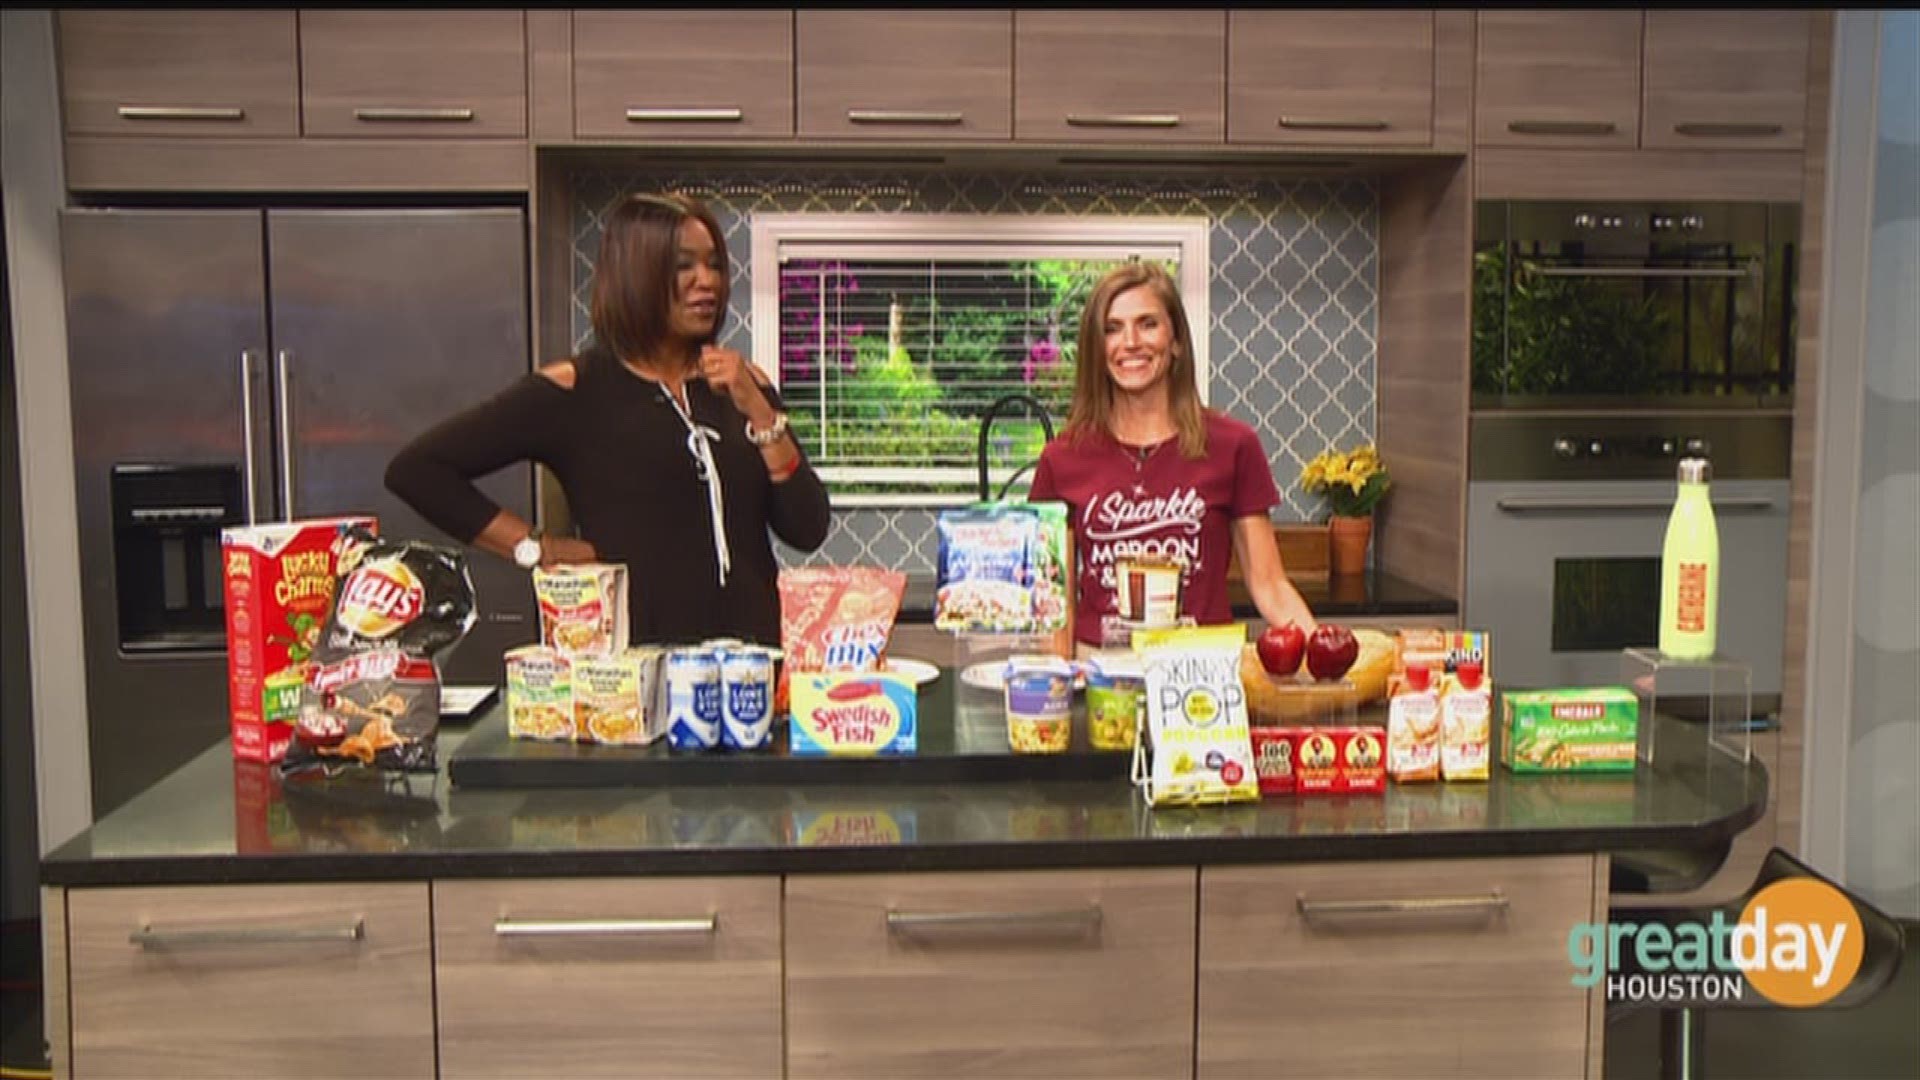 Dietitian Catherine Kruppa discusses the smart way to keep excess pounds of during college.